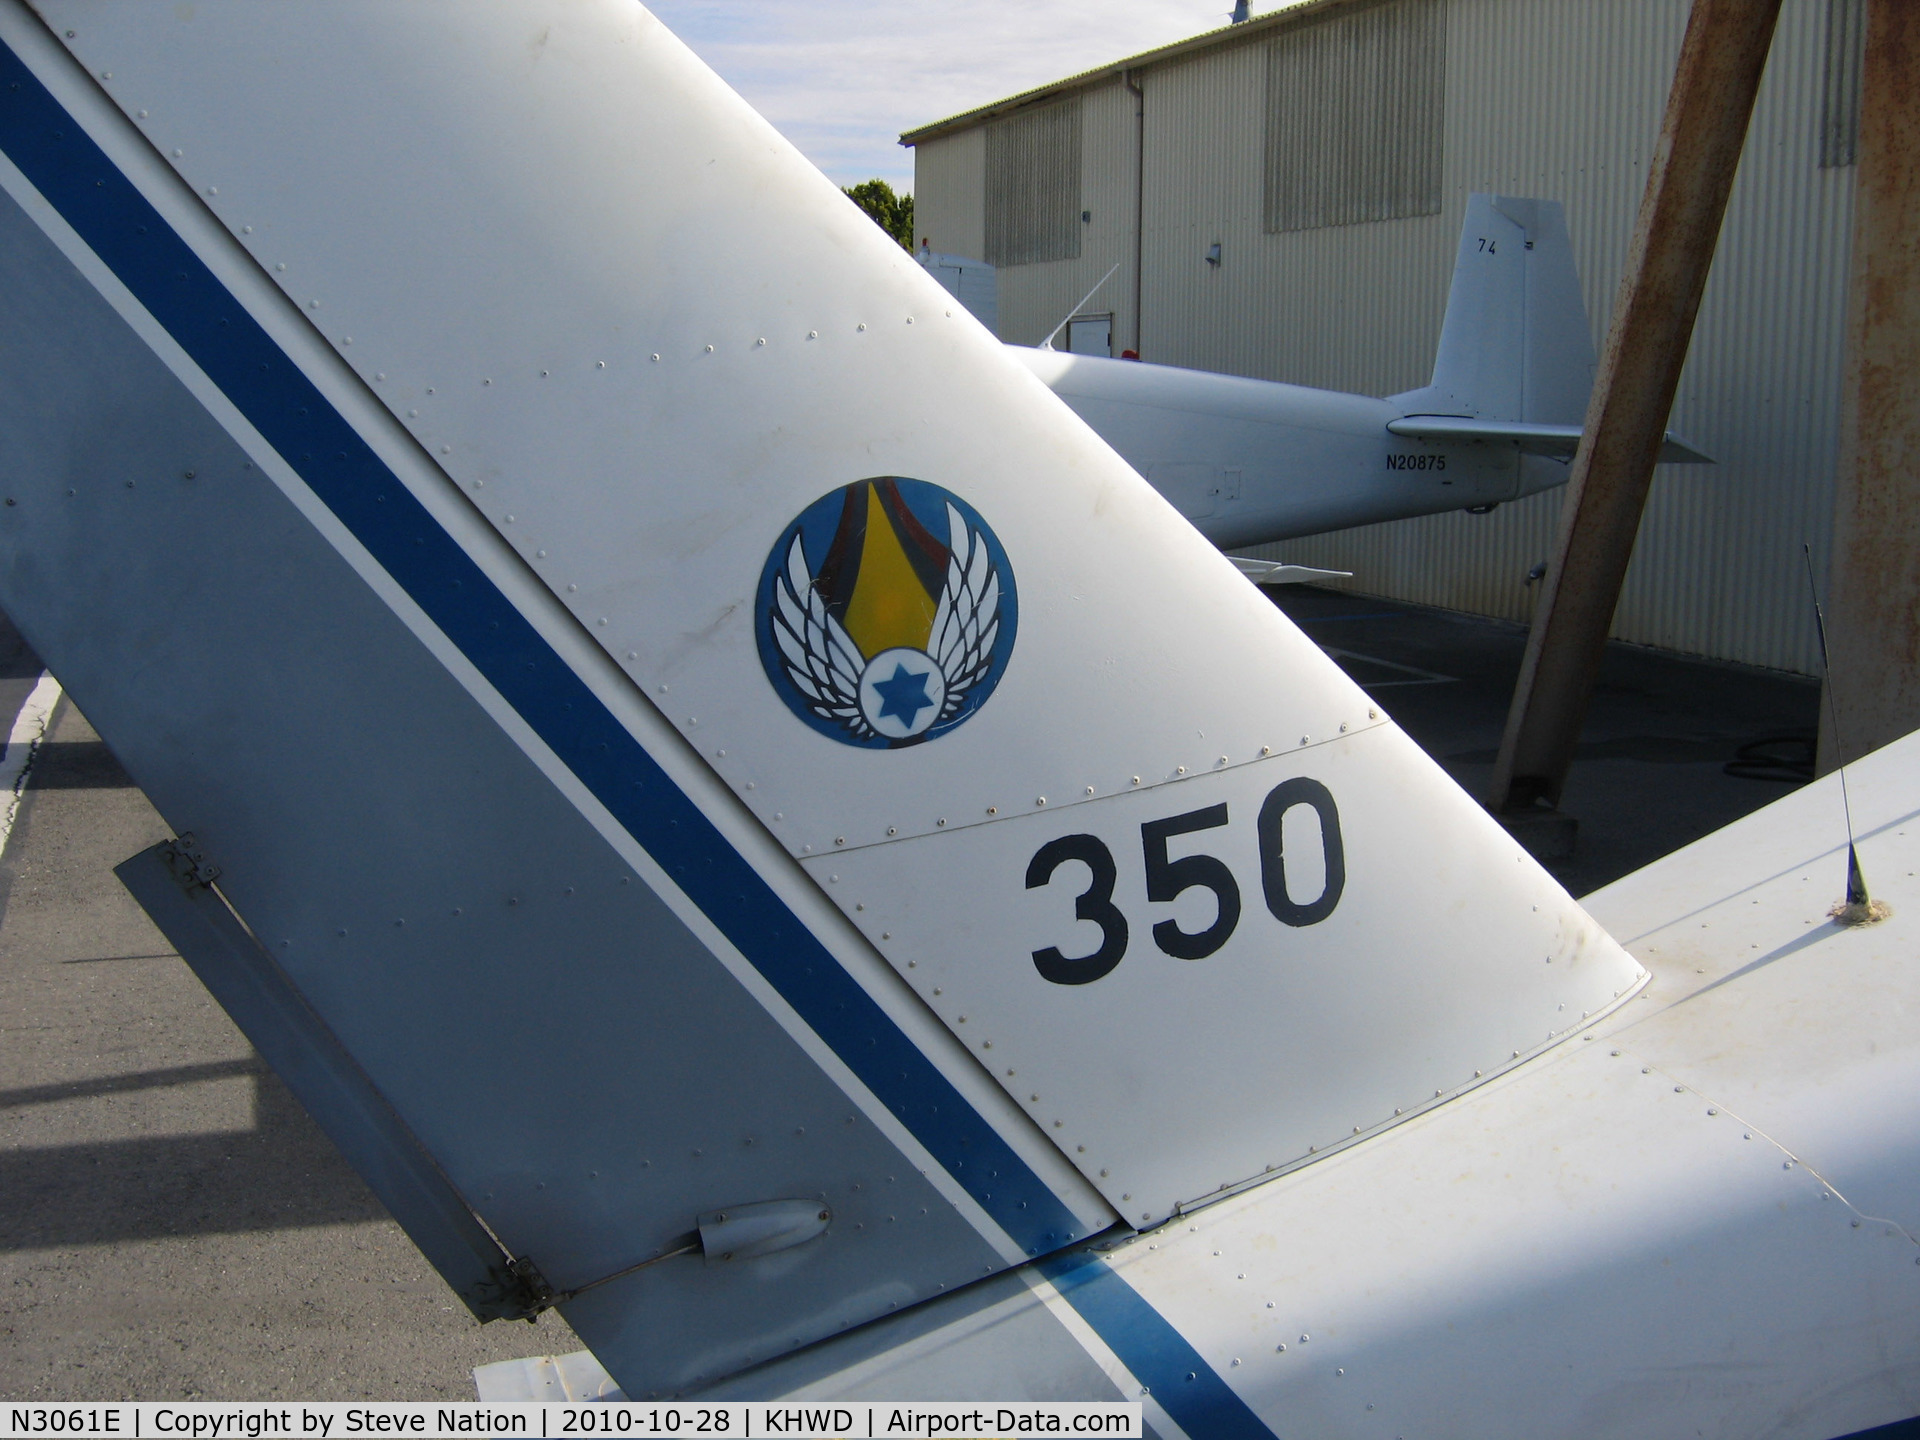 N3061E, Socata TB-20 Trinidad C/N 1707, ex-Israeli Defence Force TB-20 Trinidad No. 350 @ Hayward, CA with a dozen other TB-20s for civilian mds - became N3061E for owner in Texas